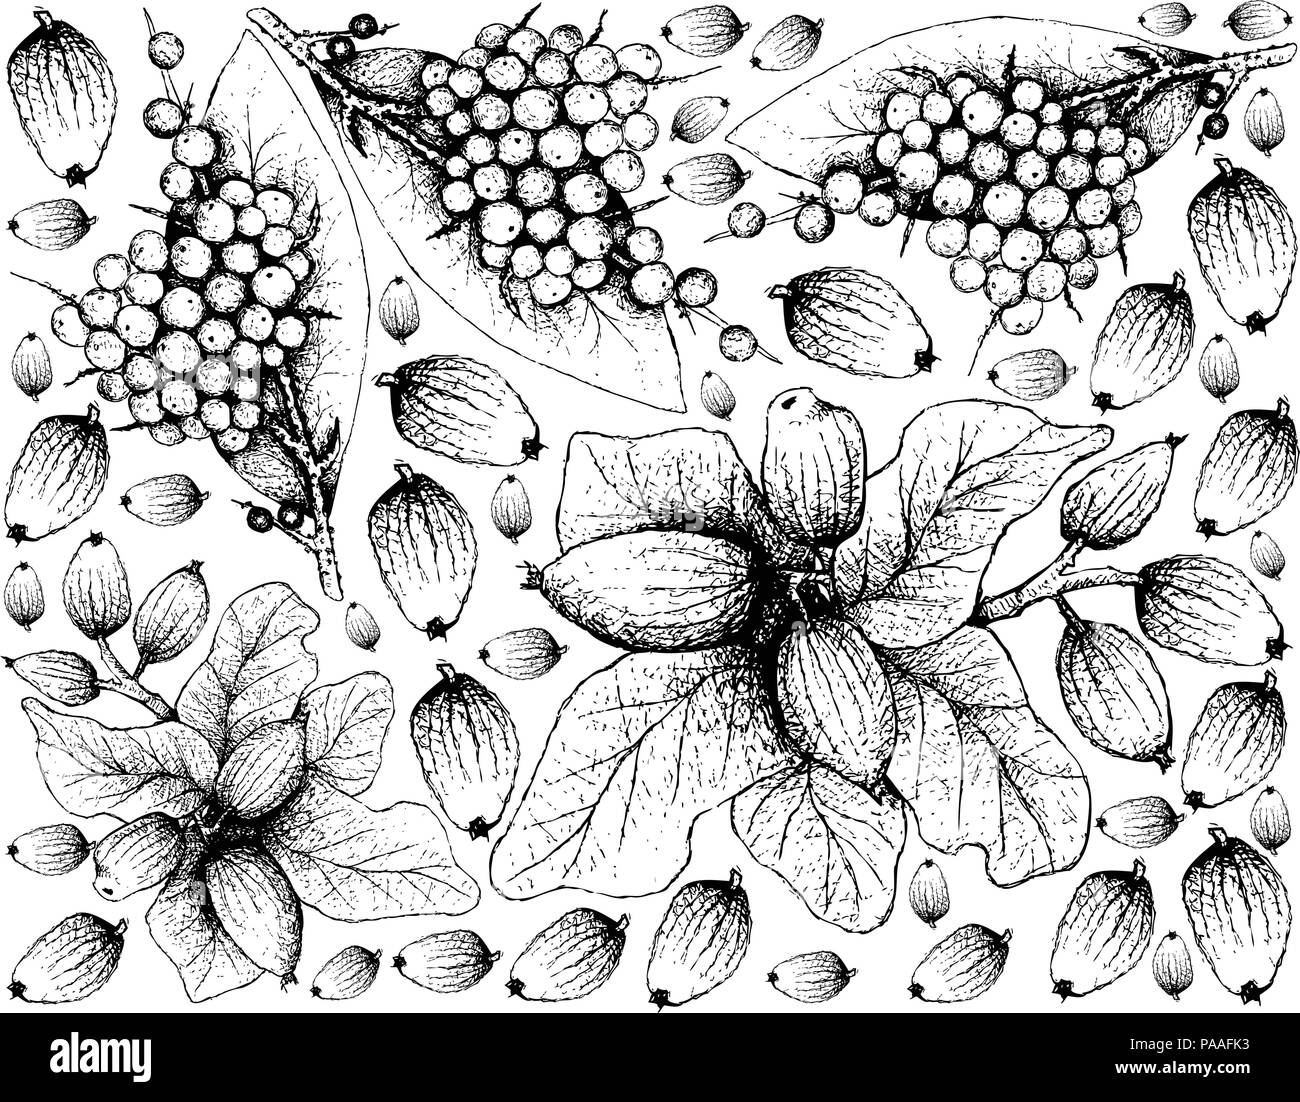 Berry Fruit, Illustration Wallpaper Background of Hand Drawn Sketch of False Black Pepper or Embelia Ribes and Peumo, Chilean Acorn or Cryptocarya Alb Stock Vector